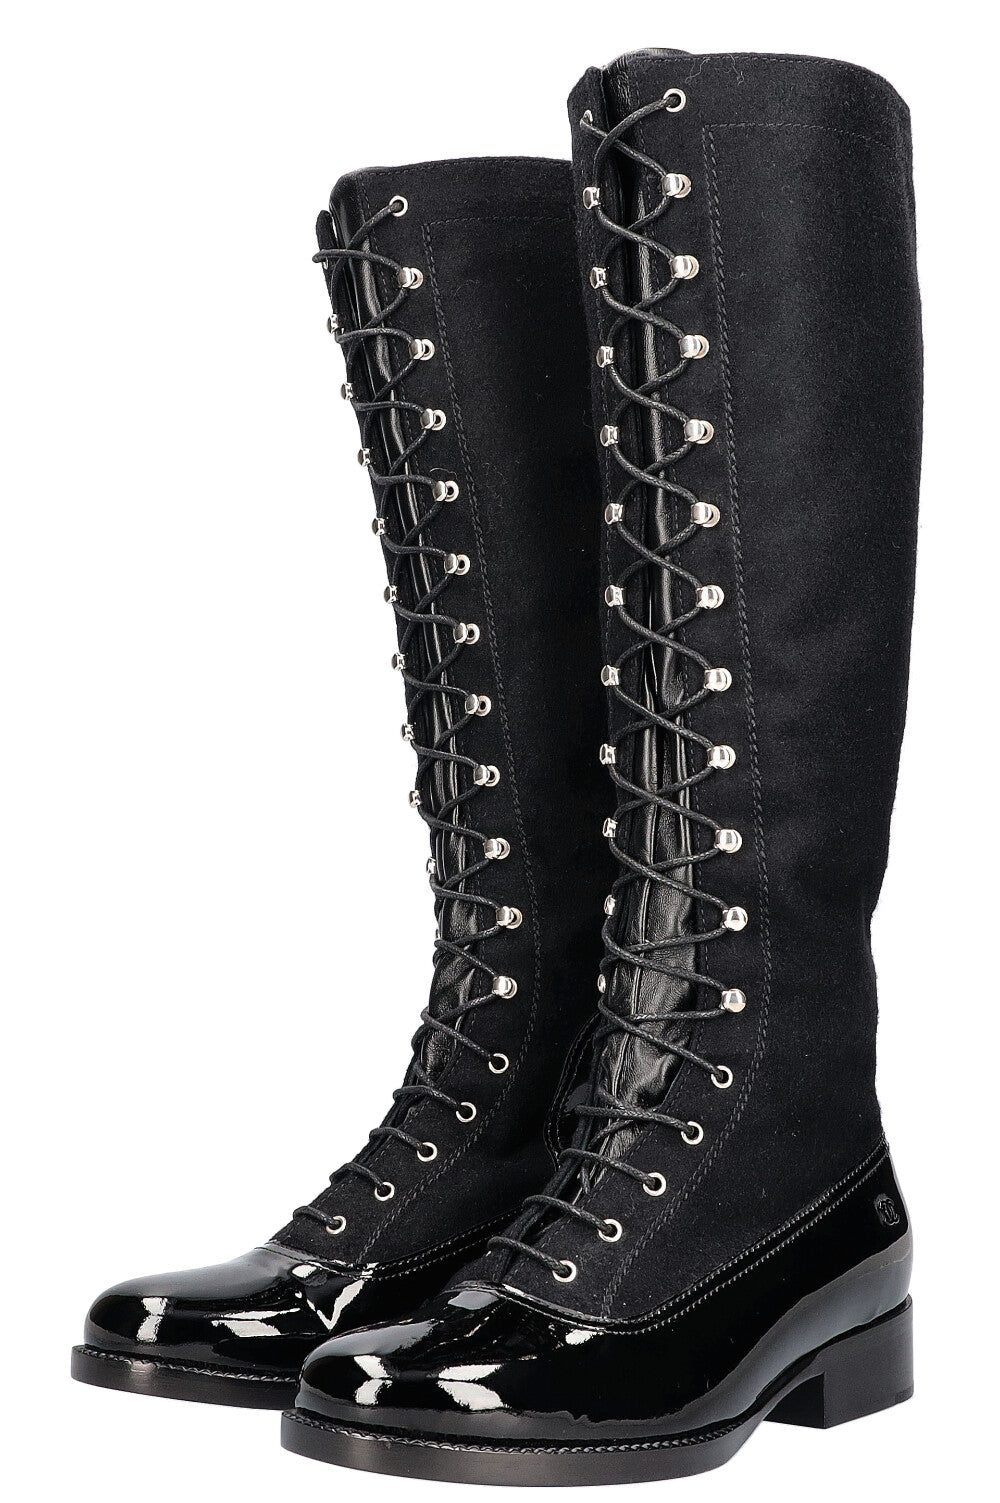 CHANEL Lace Up Knee Boots Black